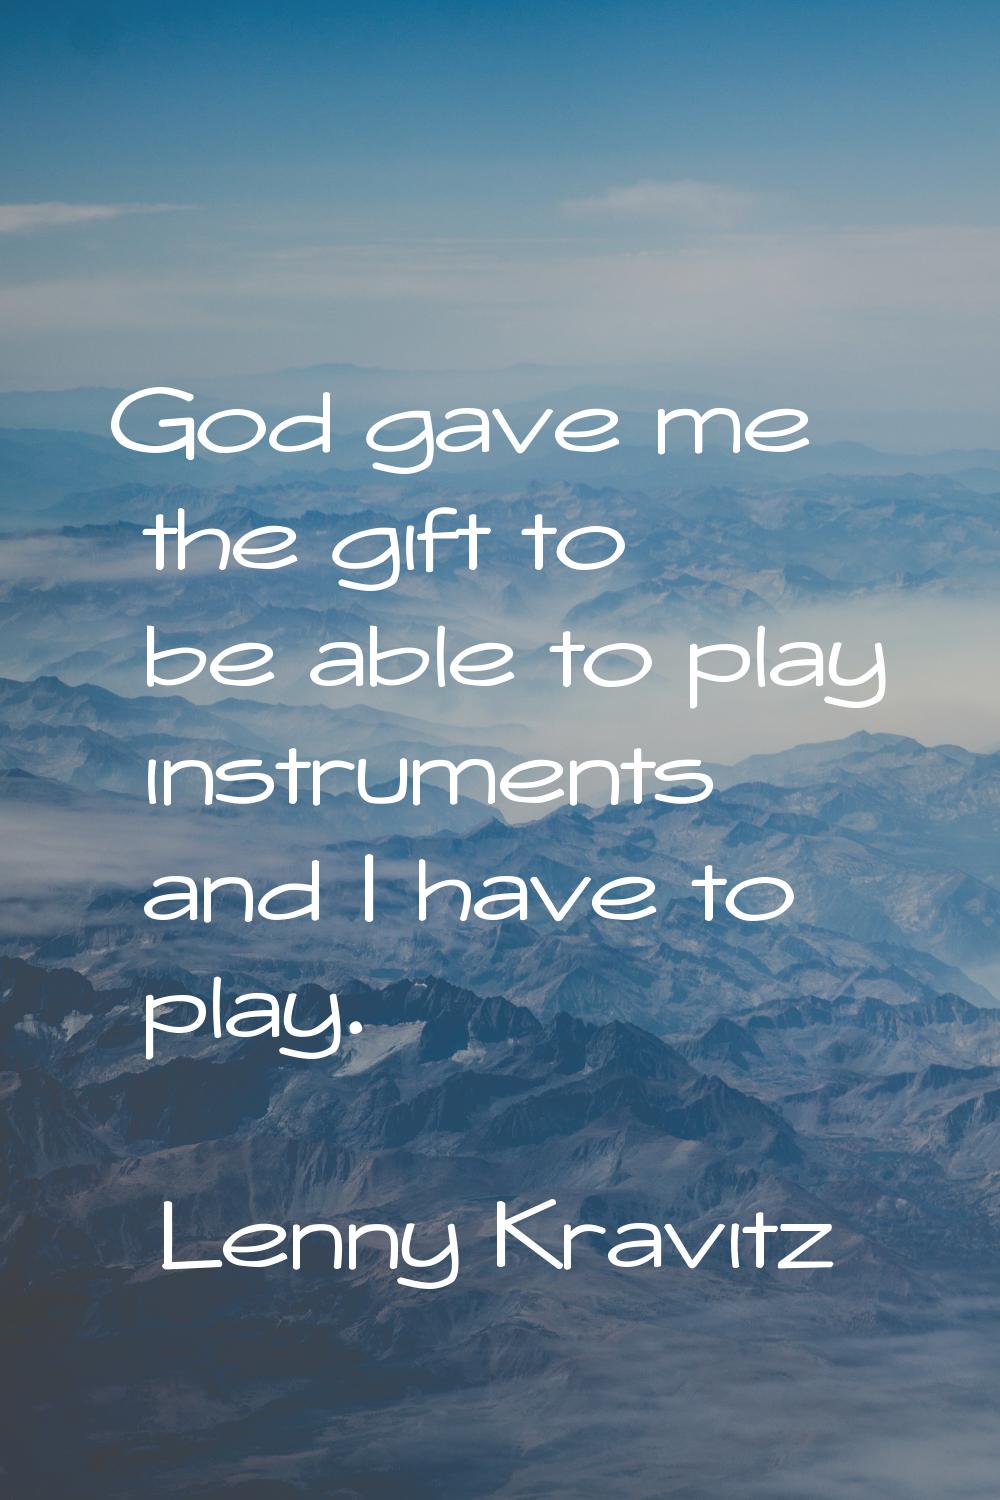 God gave me the gift to be able to play instruments and I have to play.